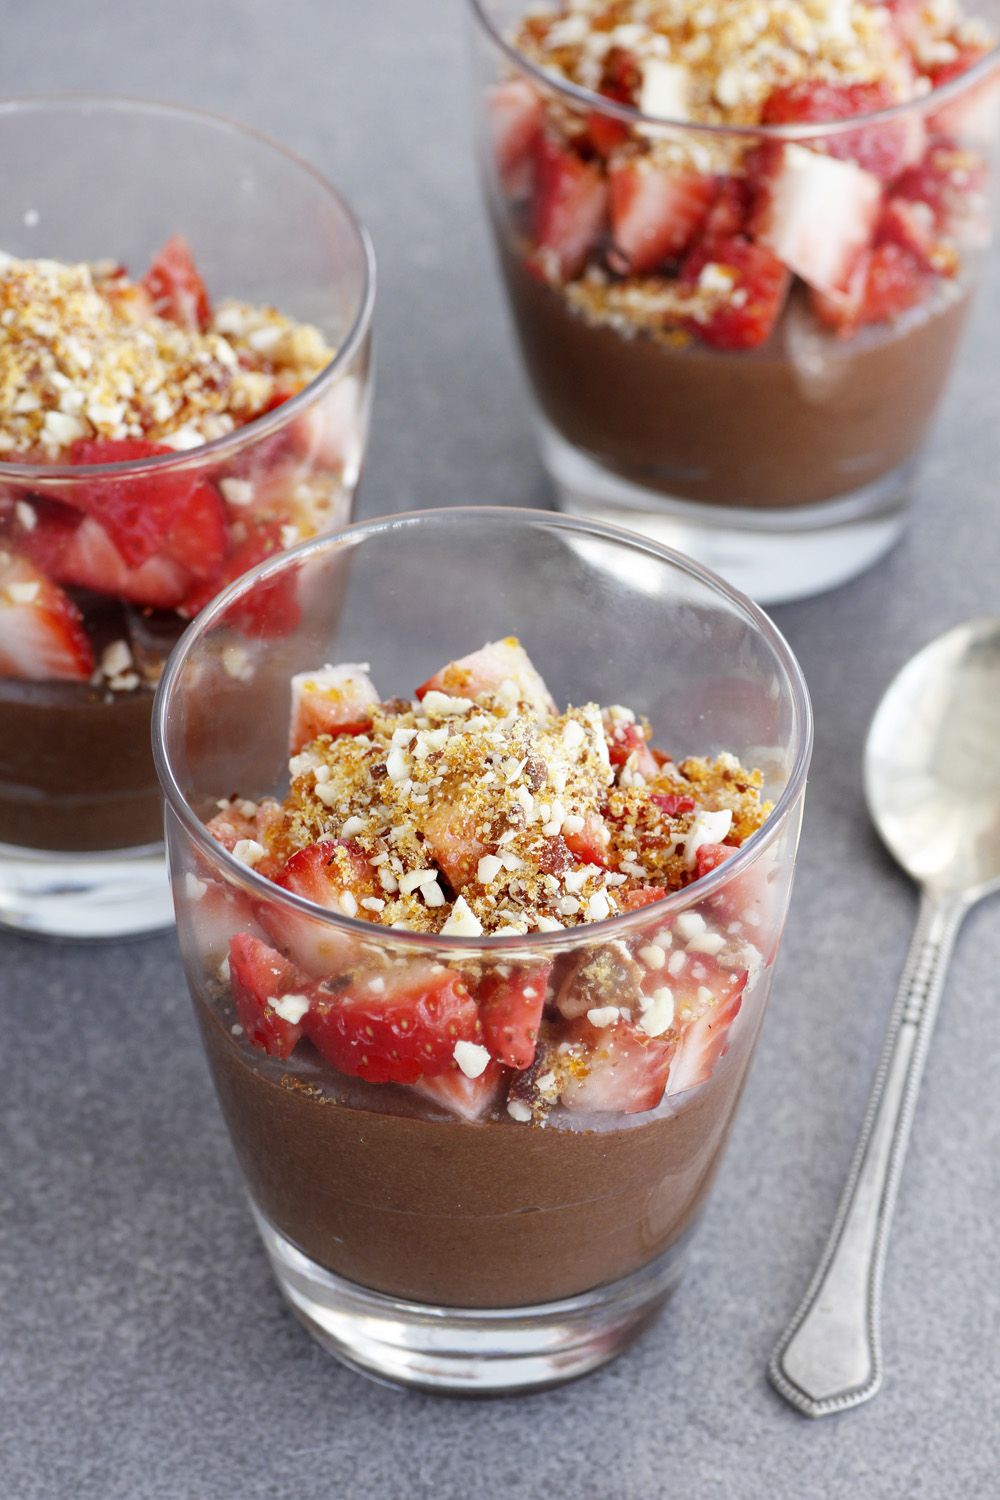 Chocolate, Strawberry and Candied Almonds Dessert